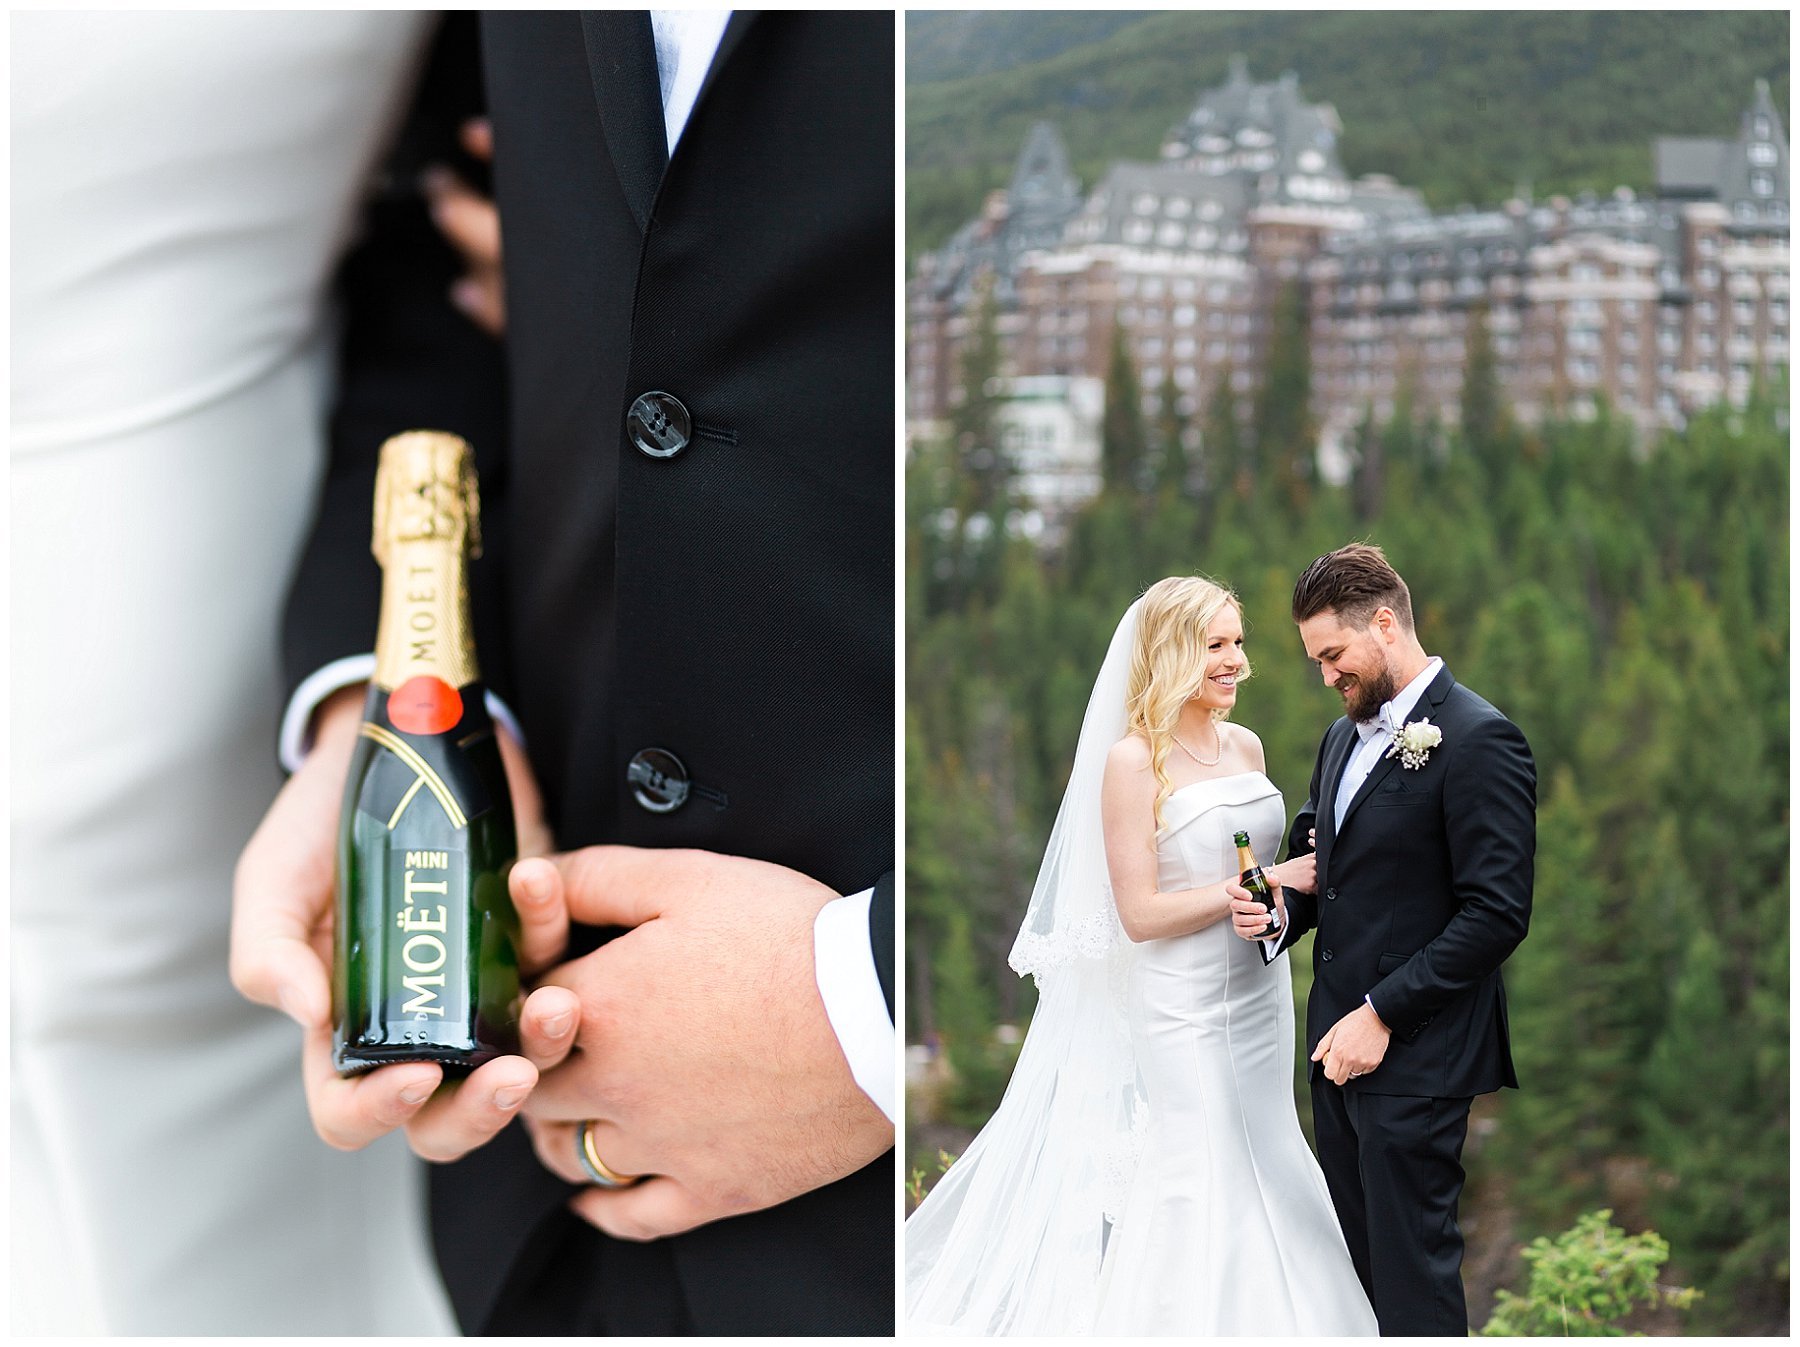 Champagne toast with bride and groom.